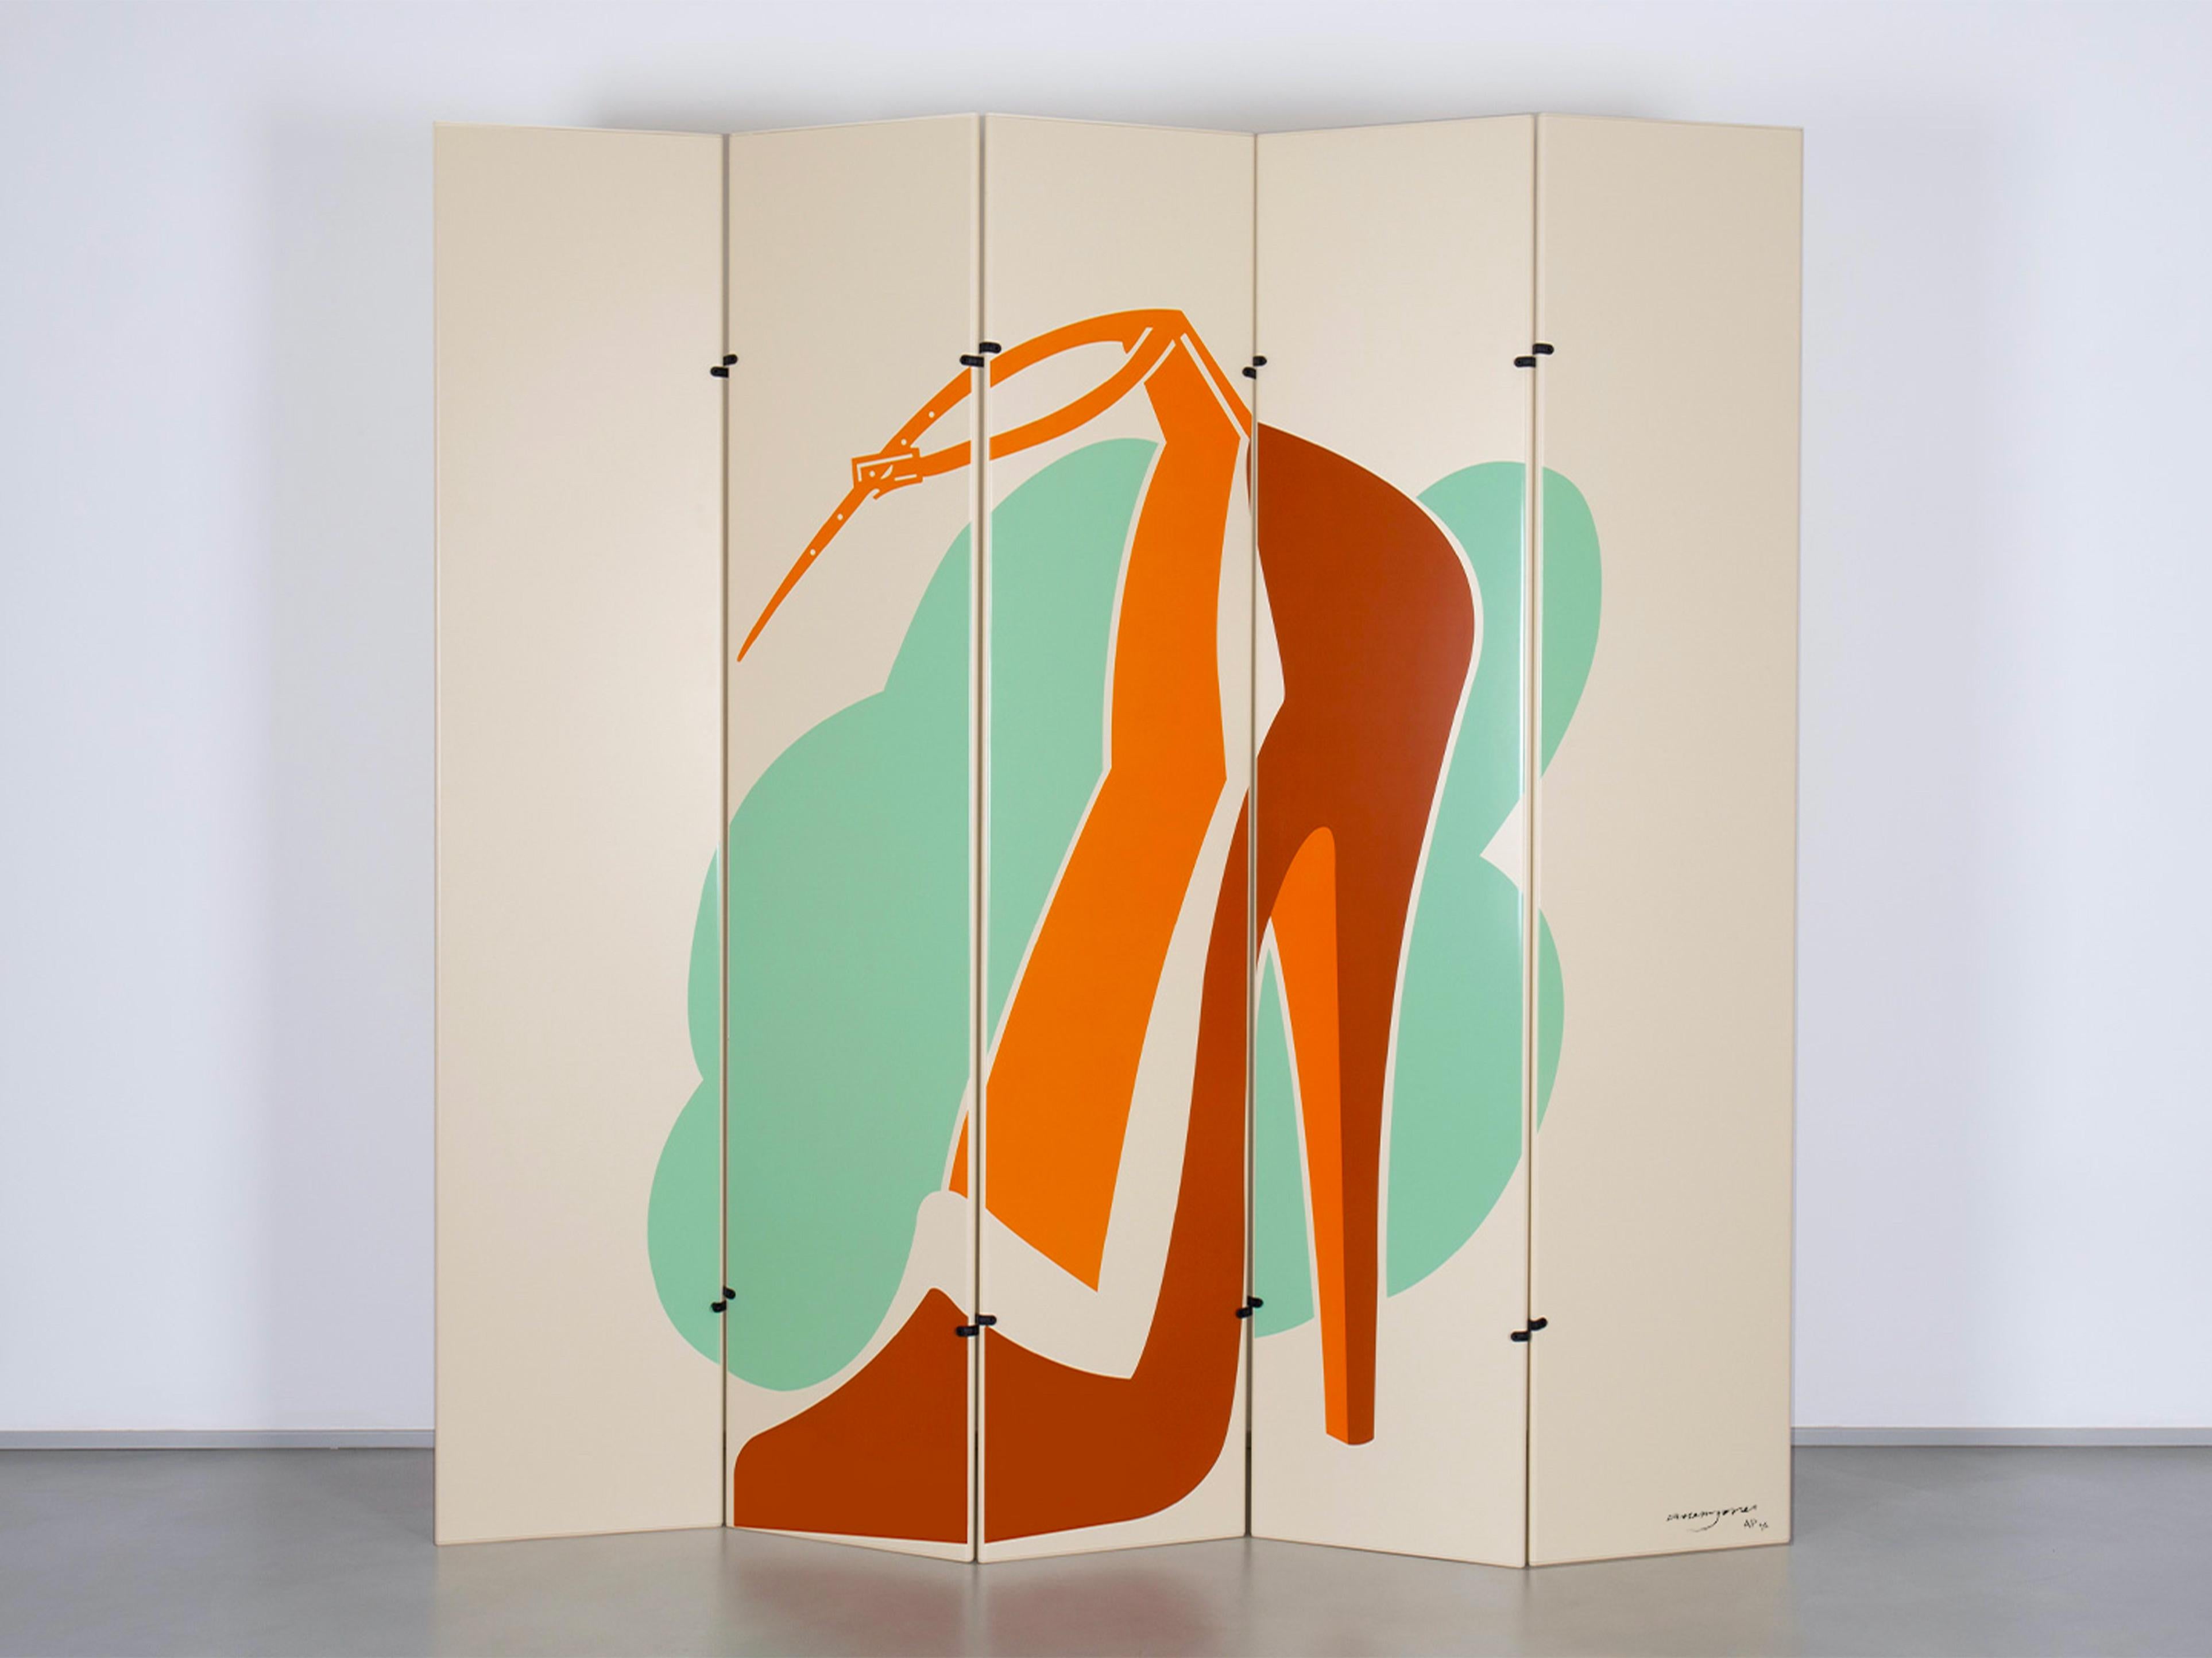 A brand new screen by Allen Jones exclusively for Paradisoterrestre in a limited edition of 30 signed and numbered pieces (+2AP).

The legendary British pop artist – part of whose work evolves around the female figure – conceives this piece of